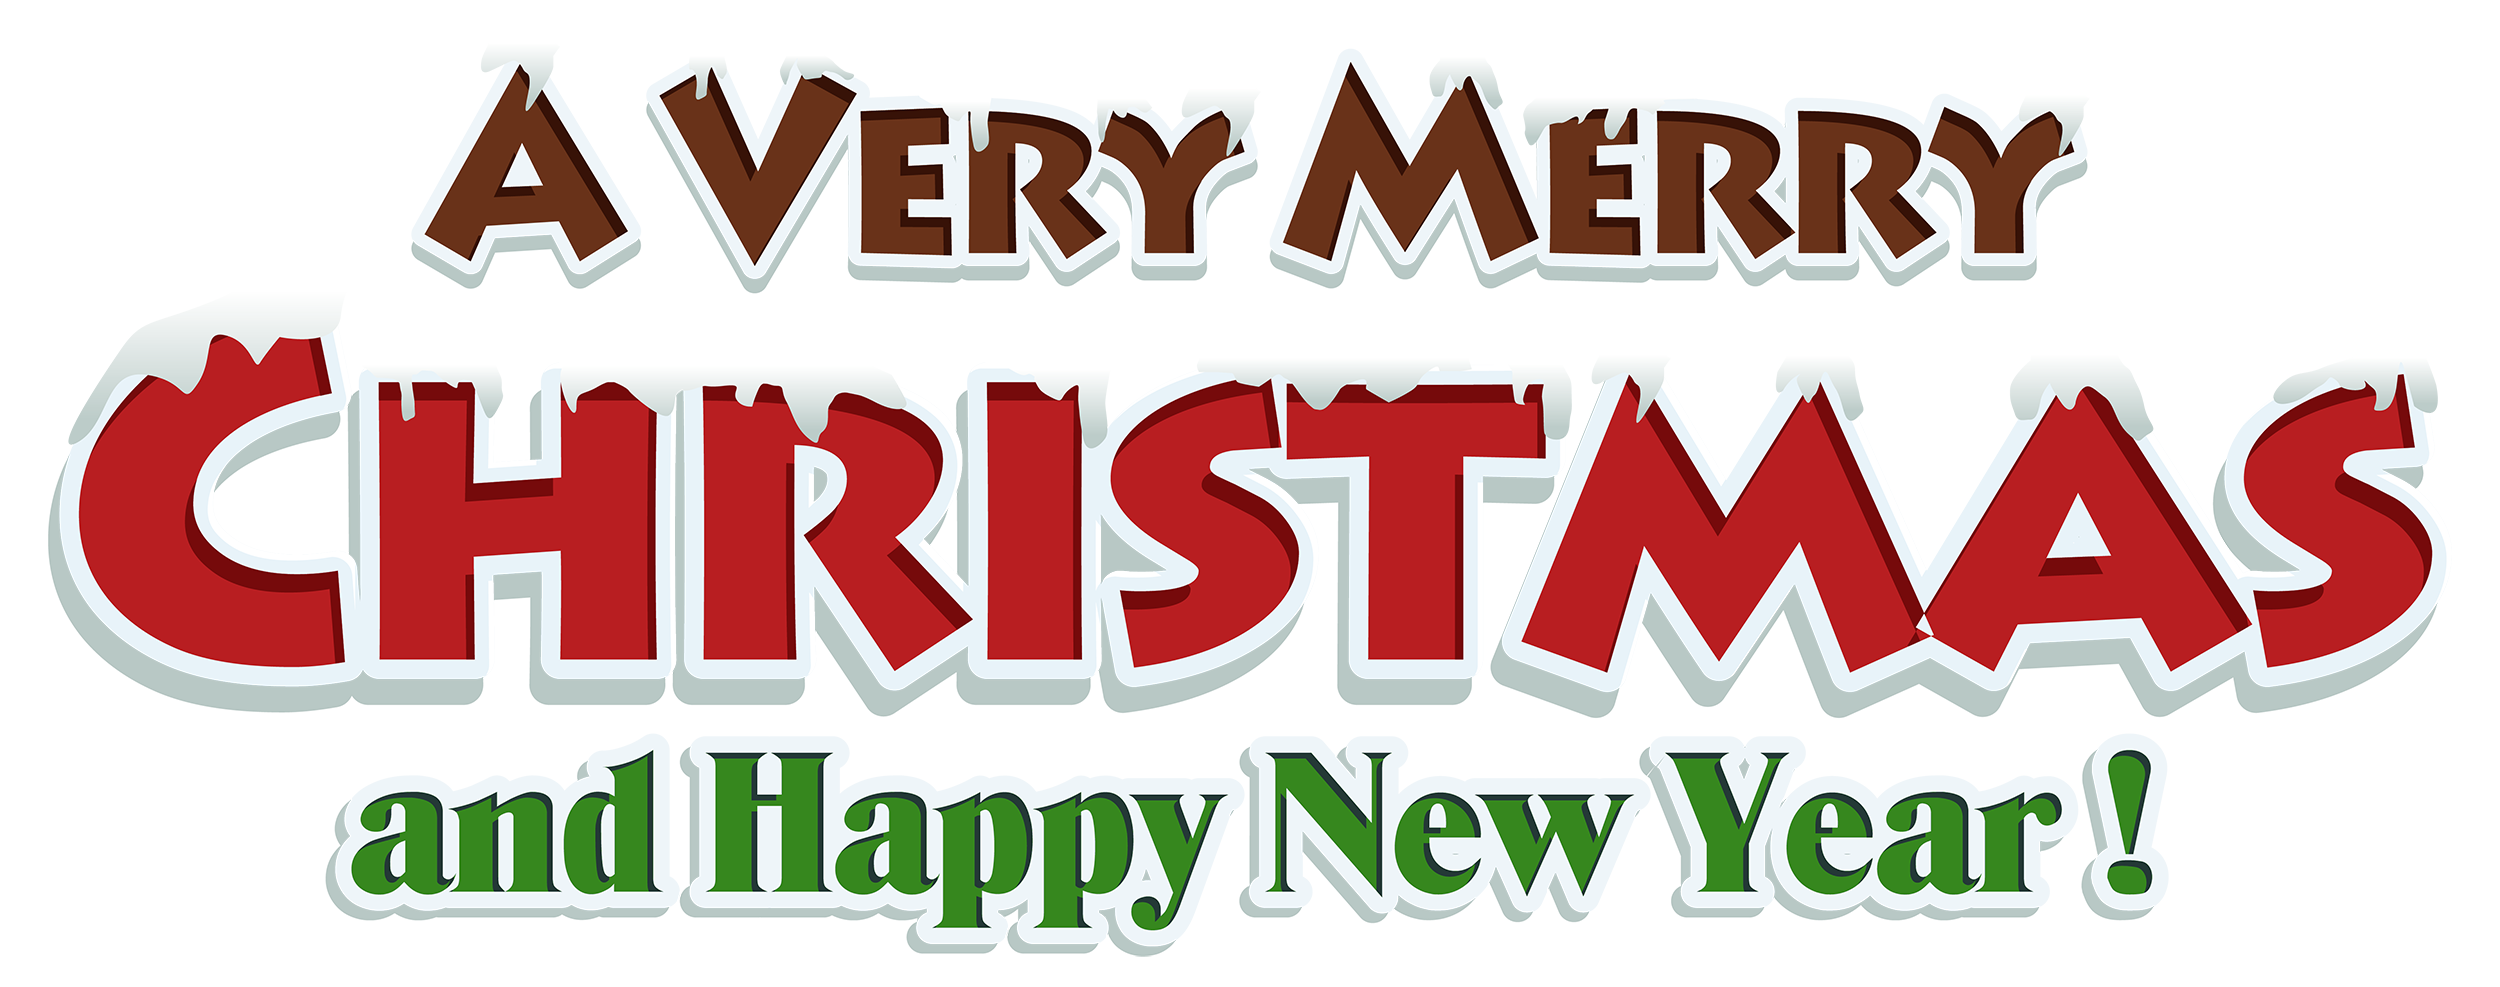 Text Christmas Happy Free HQ Image PNG Image